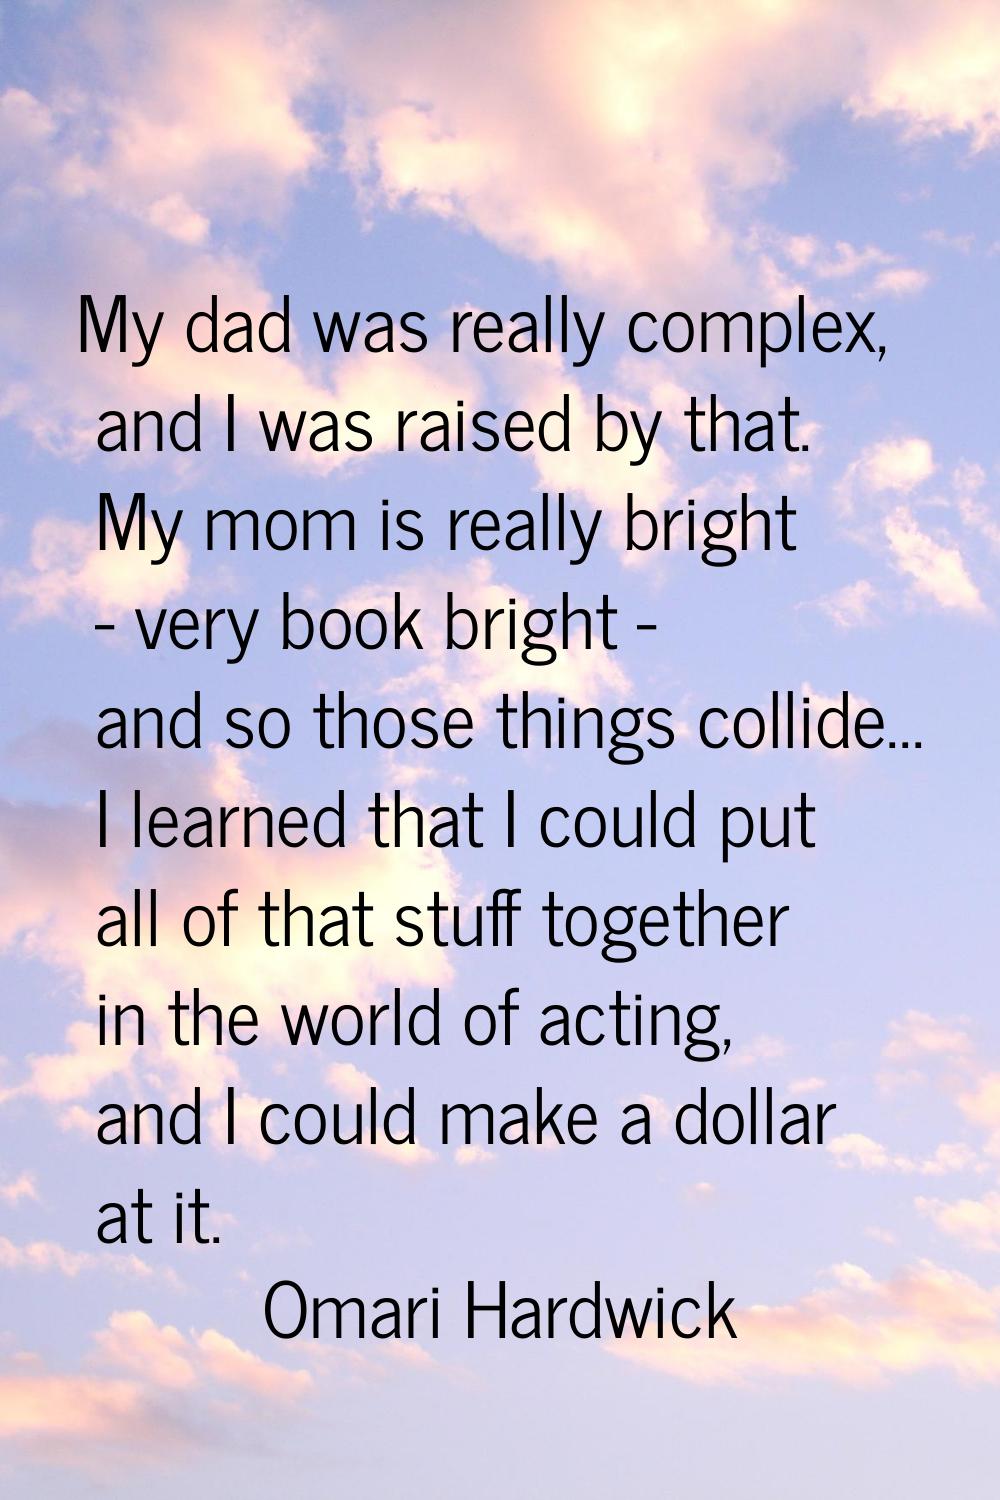 My dad was really complex, and I was raised by that. My mom is really bright - very book bright - a